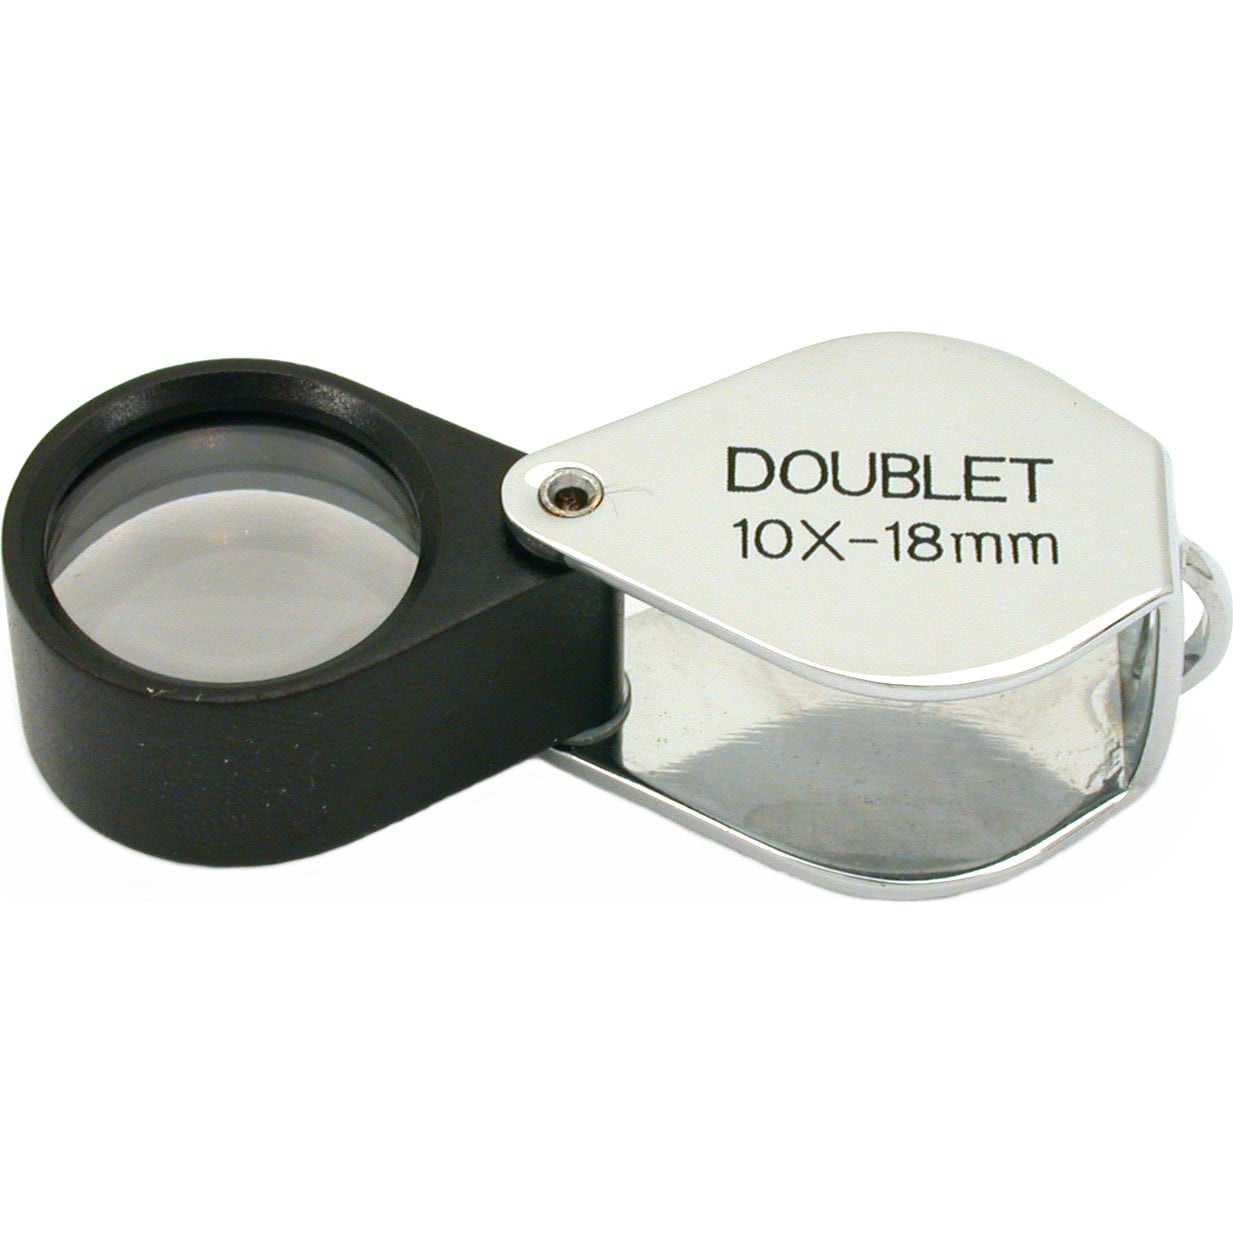 Jewelers loupe, In offer price with free shipping